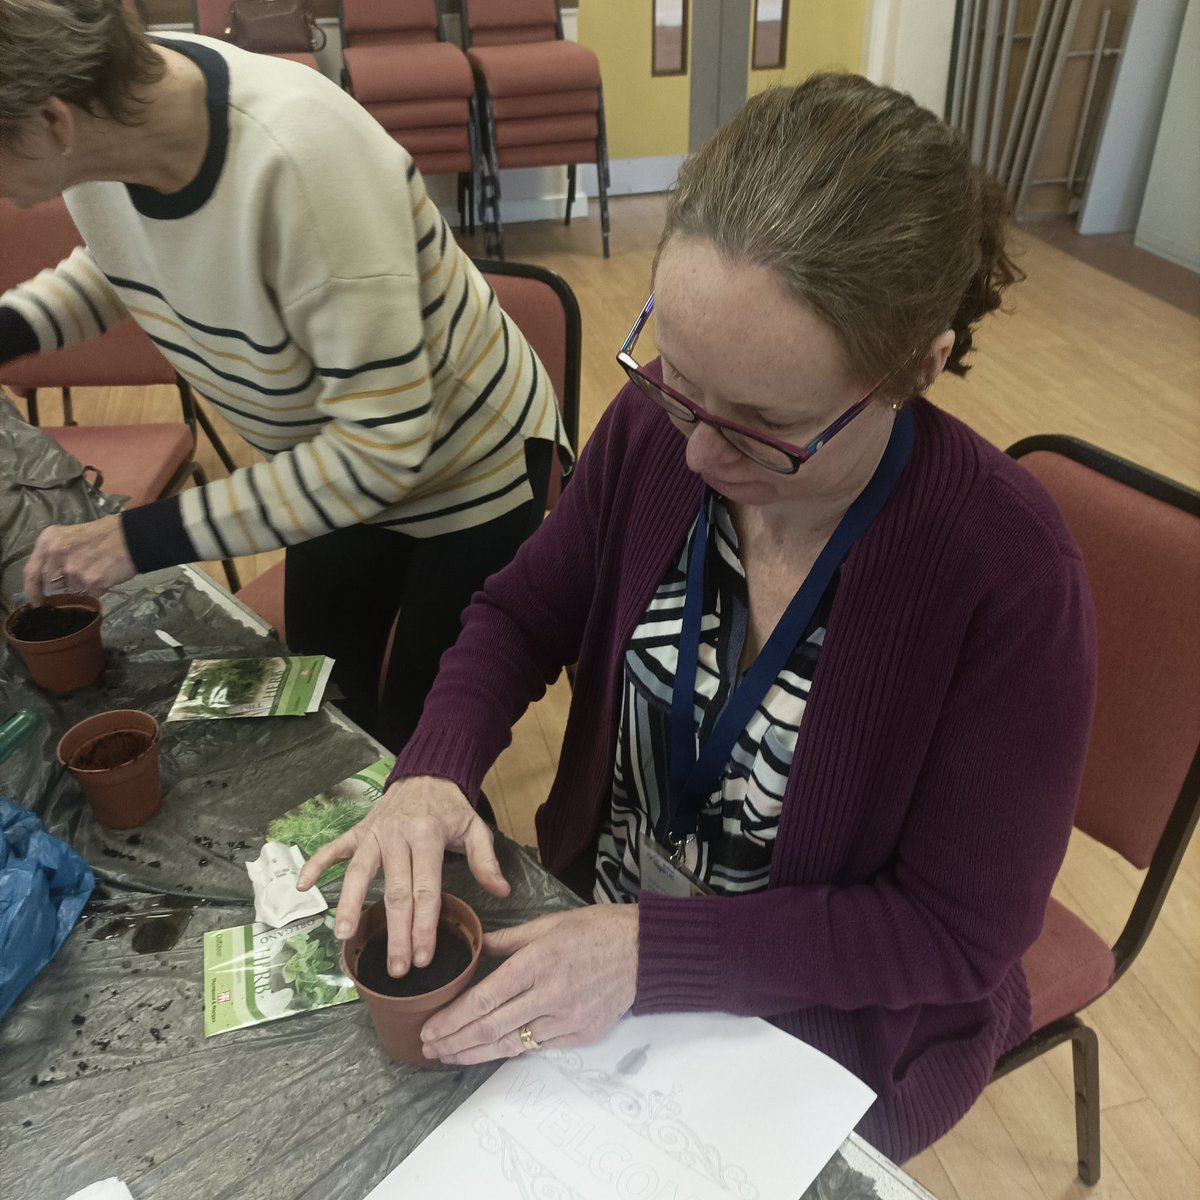 Fridays Session The Warm Space at St Helens Church. 'MY GROW MORE BURN LESS' project. representing Deane and Derby Cricket Club. Growing window sill herbs, reducing air pollution in the home. The ladies getting the hands dirty. Very therapeutic.